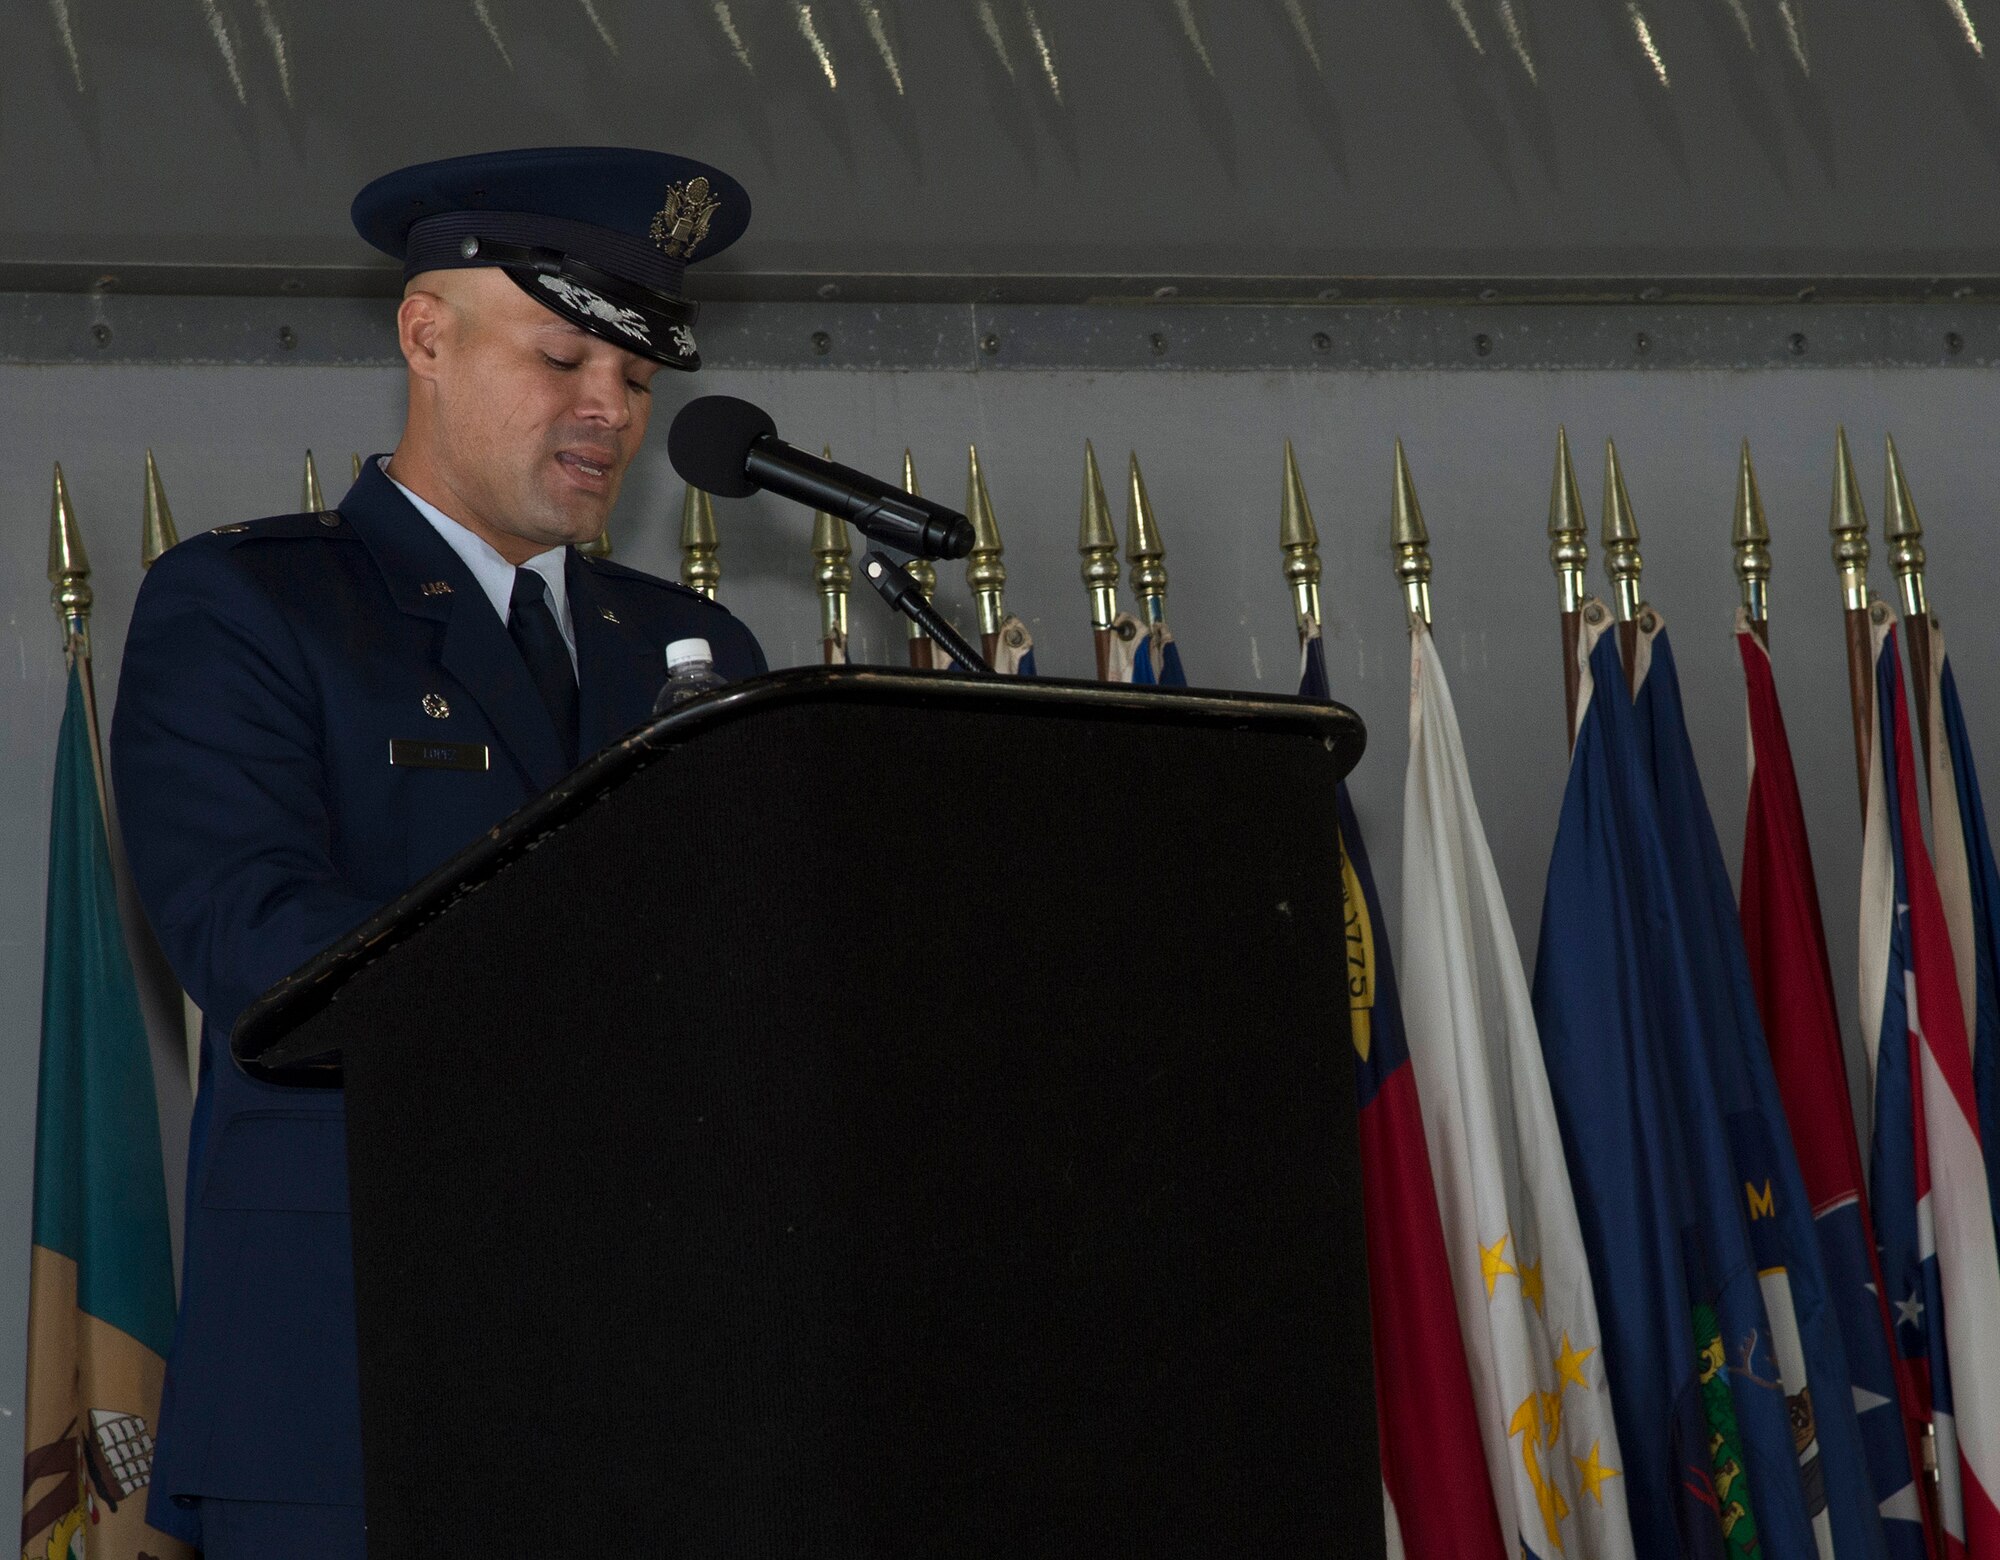 U.S. Air Force Lt. Col. Ricardo Lopez, commander of the 50th Air Refueling Squadron, gives a speech during his assumption of command ceremony at MacDill Air Force Base, Fla., Oct. 2, 2017.